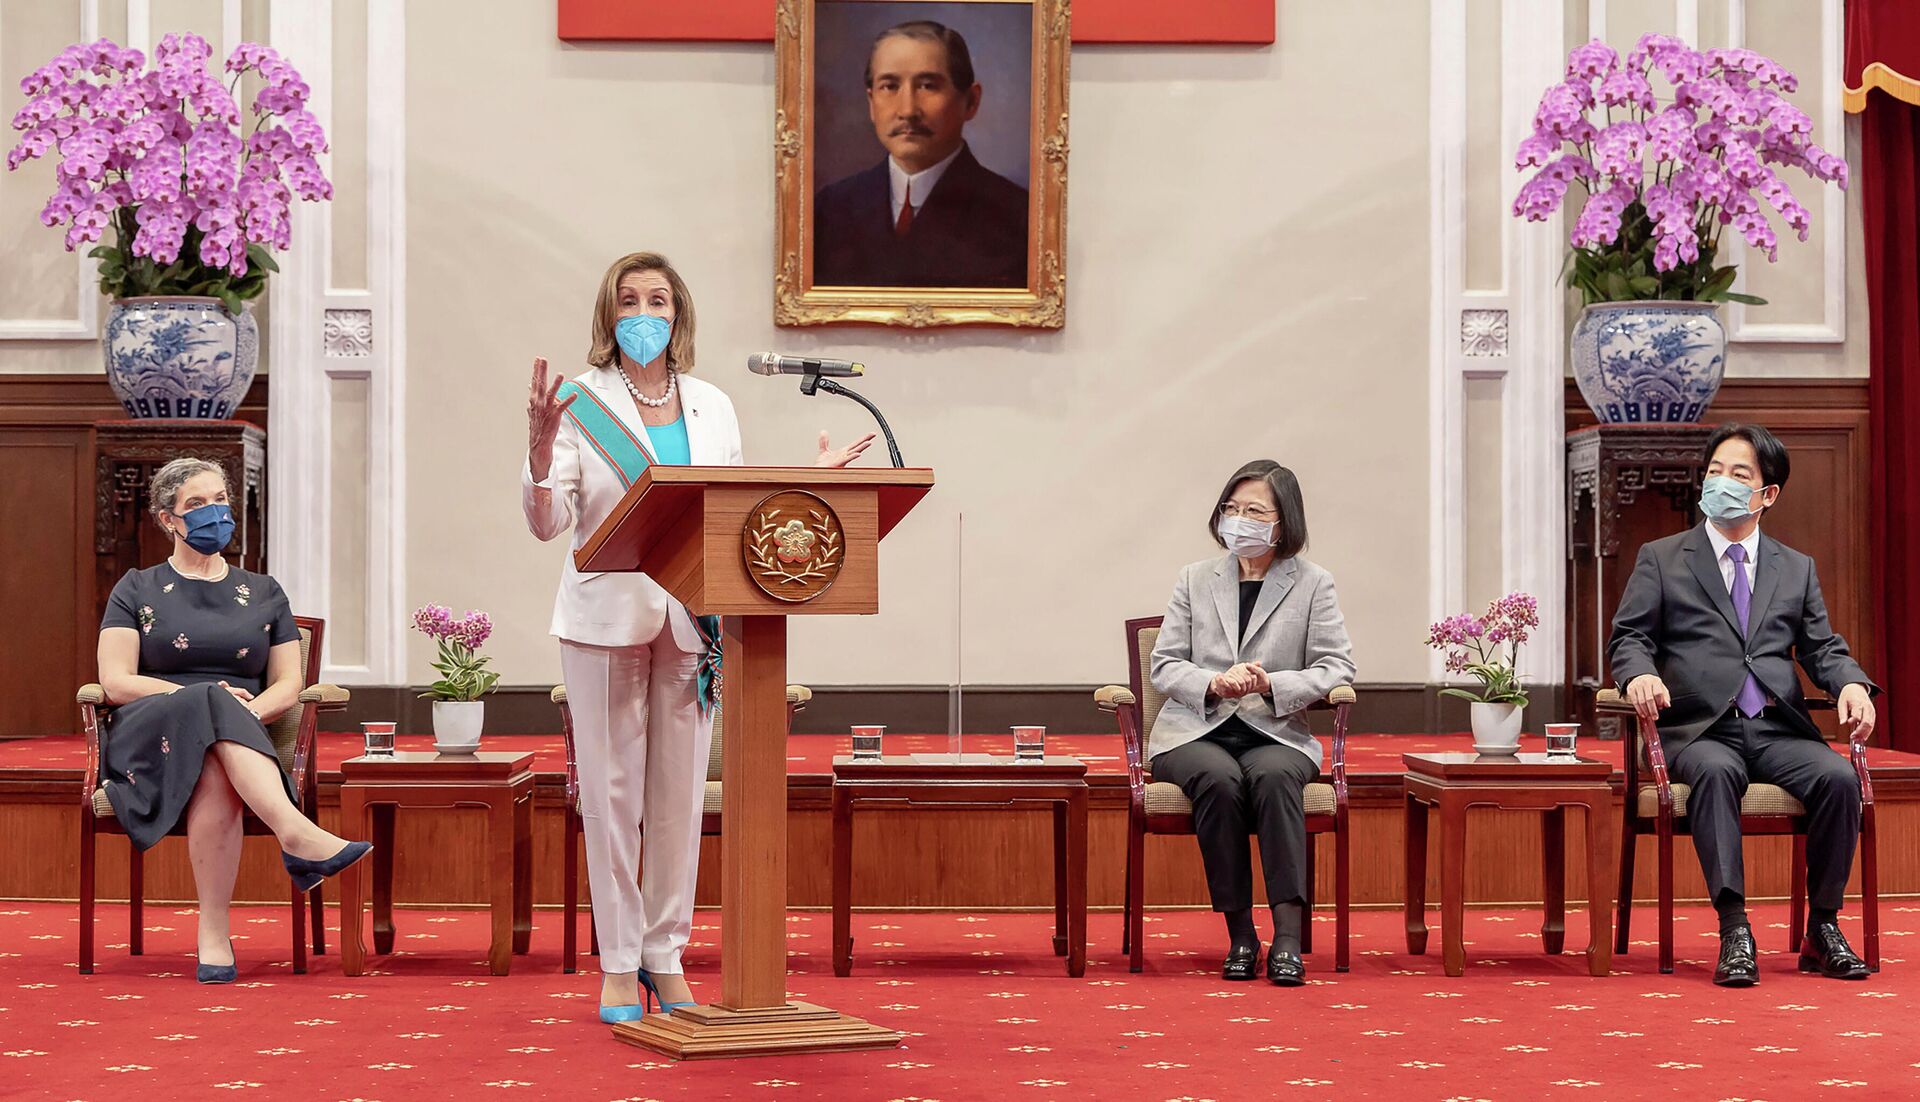 In this photo released by the Taiwan Presidential Office, U.S. House Speaker Nancy Pelosi speaks during a meeting with Taiwanese President President Tsai Ing-wen, second from right, in Taipei, Taiwan, Wednesday, Aug. 3, 2022 - Sputnik International, 1920, 10.10.2022